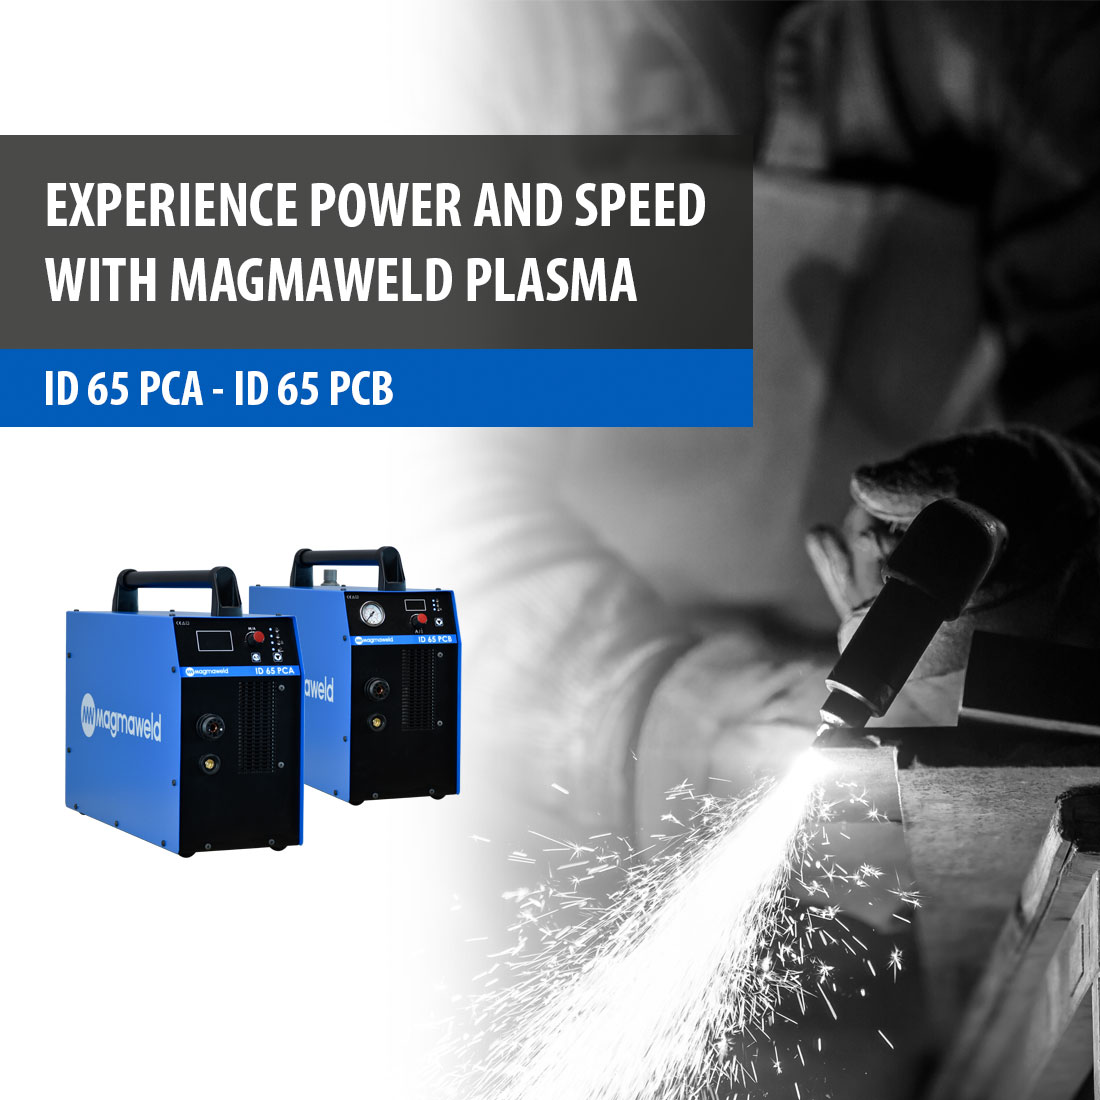 Experience Power and Speed with Magmaweld Plasma